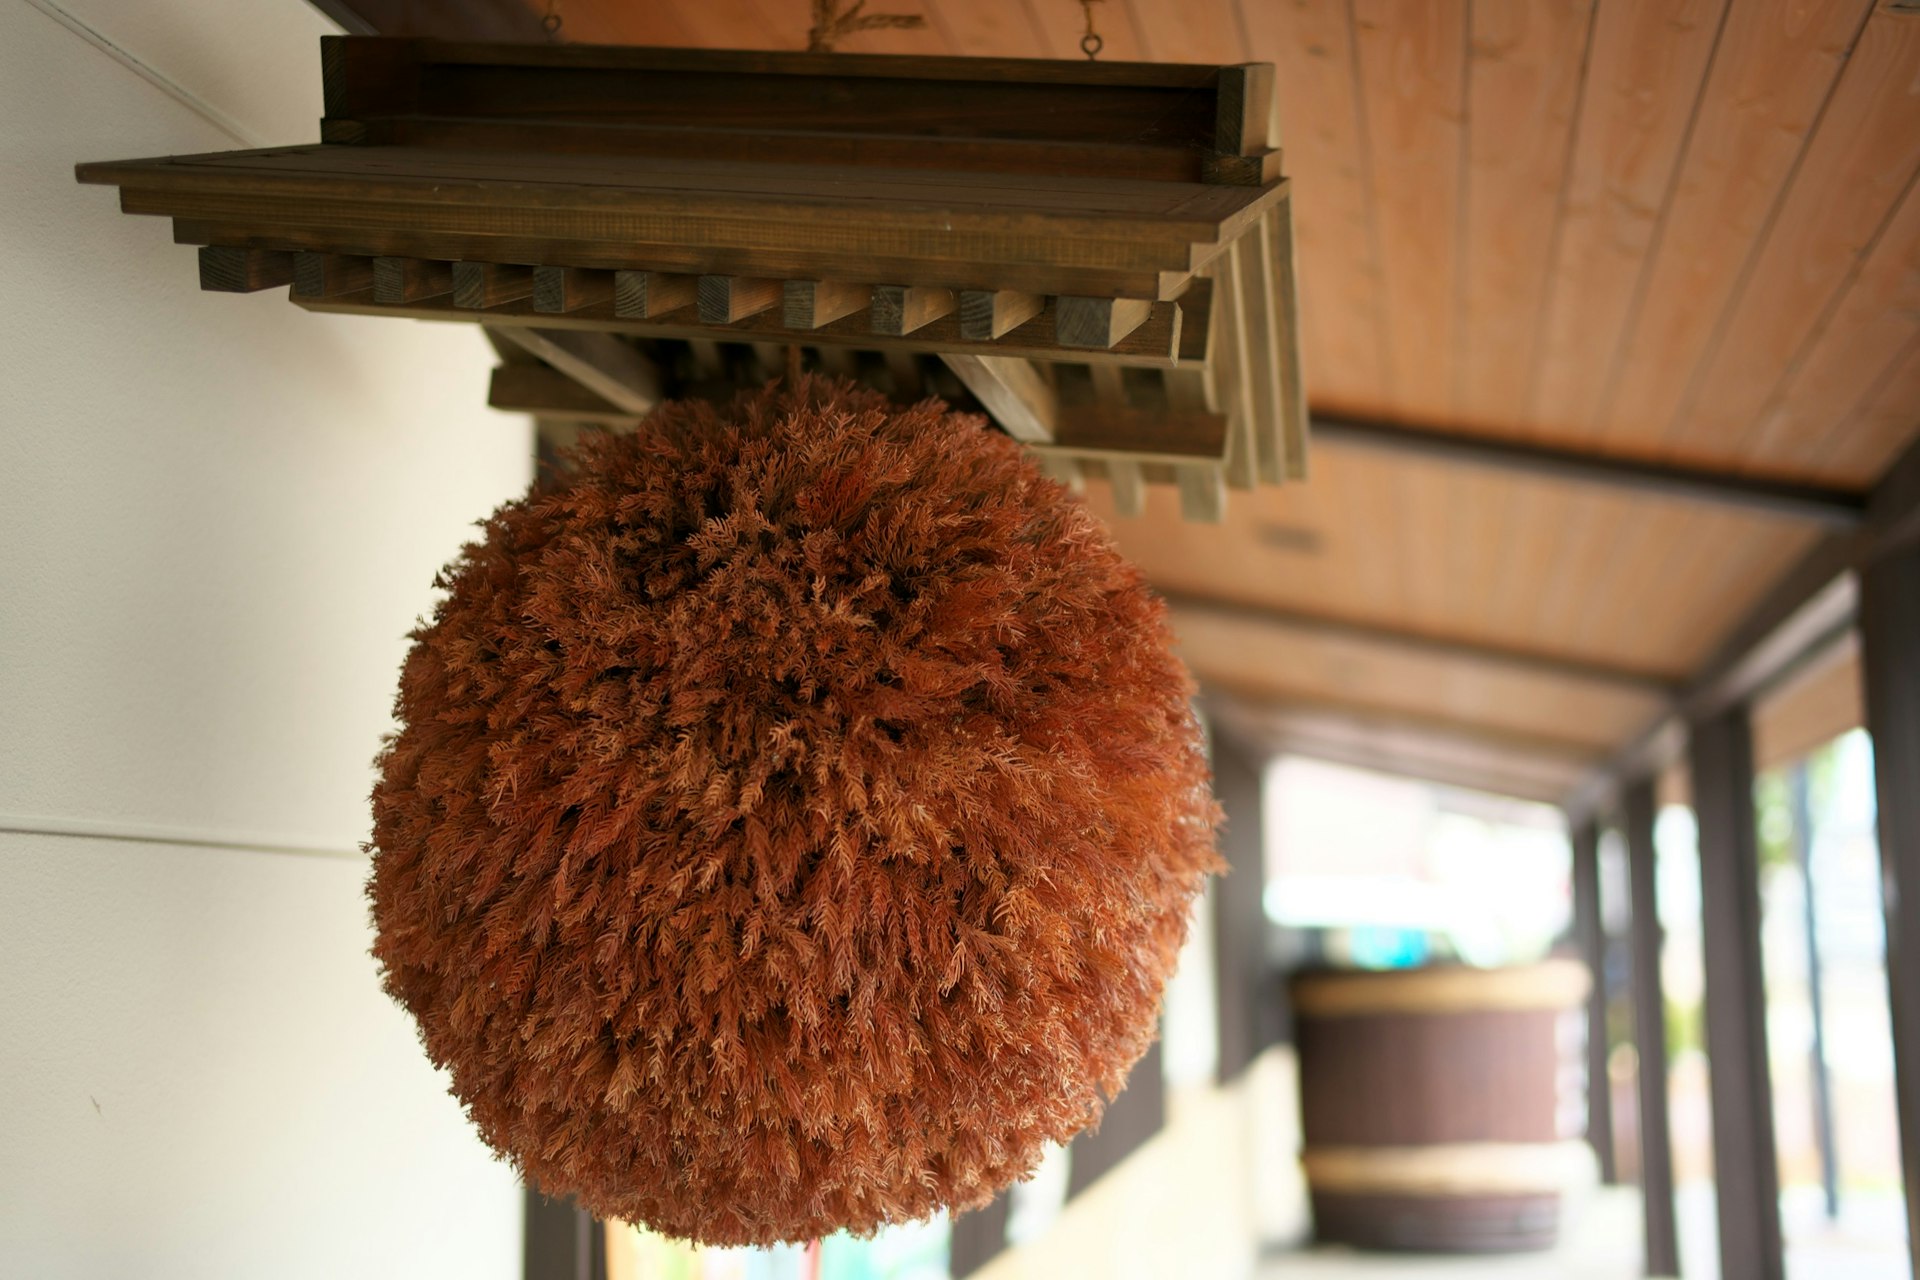 Akita,Japan-October 4, 2019: Sugidama, ball made from sprigs of Japanese cedar, traditionally hung in the eaves of sake breweries